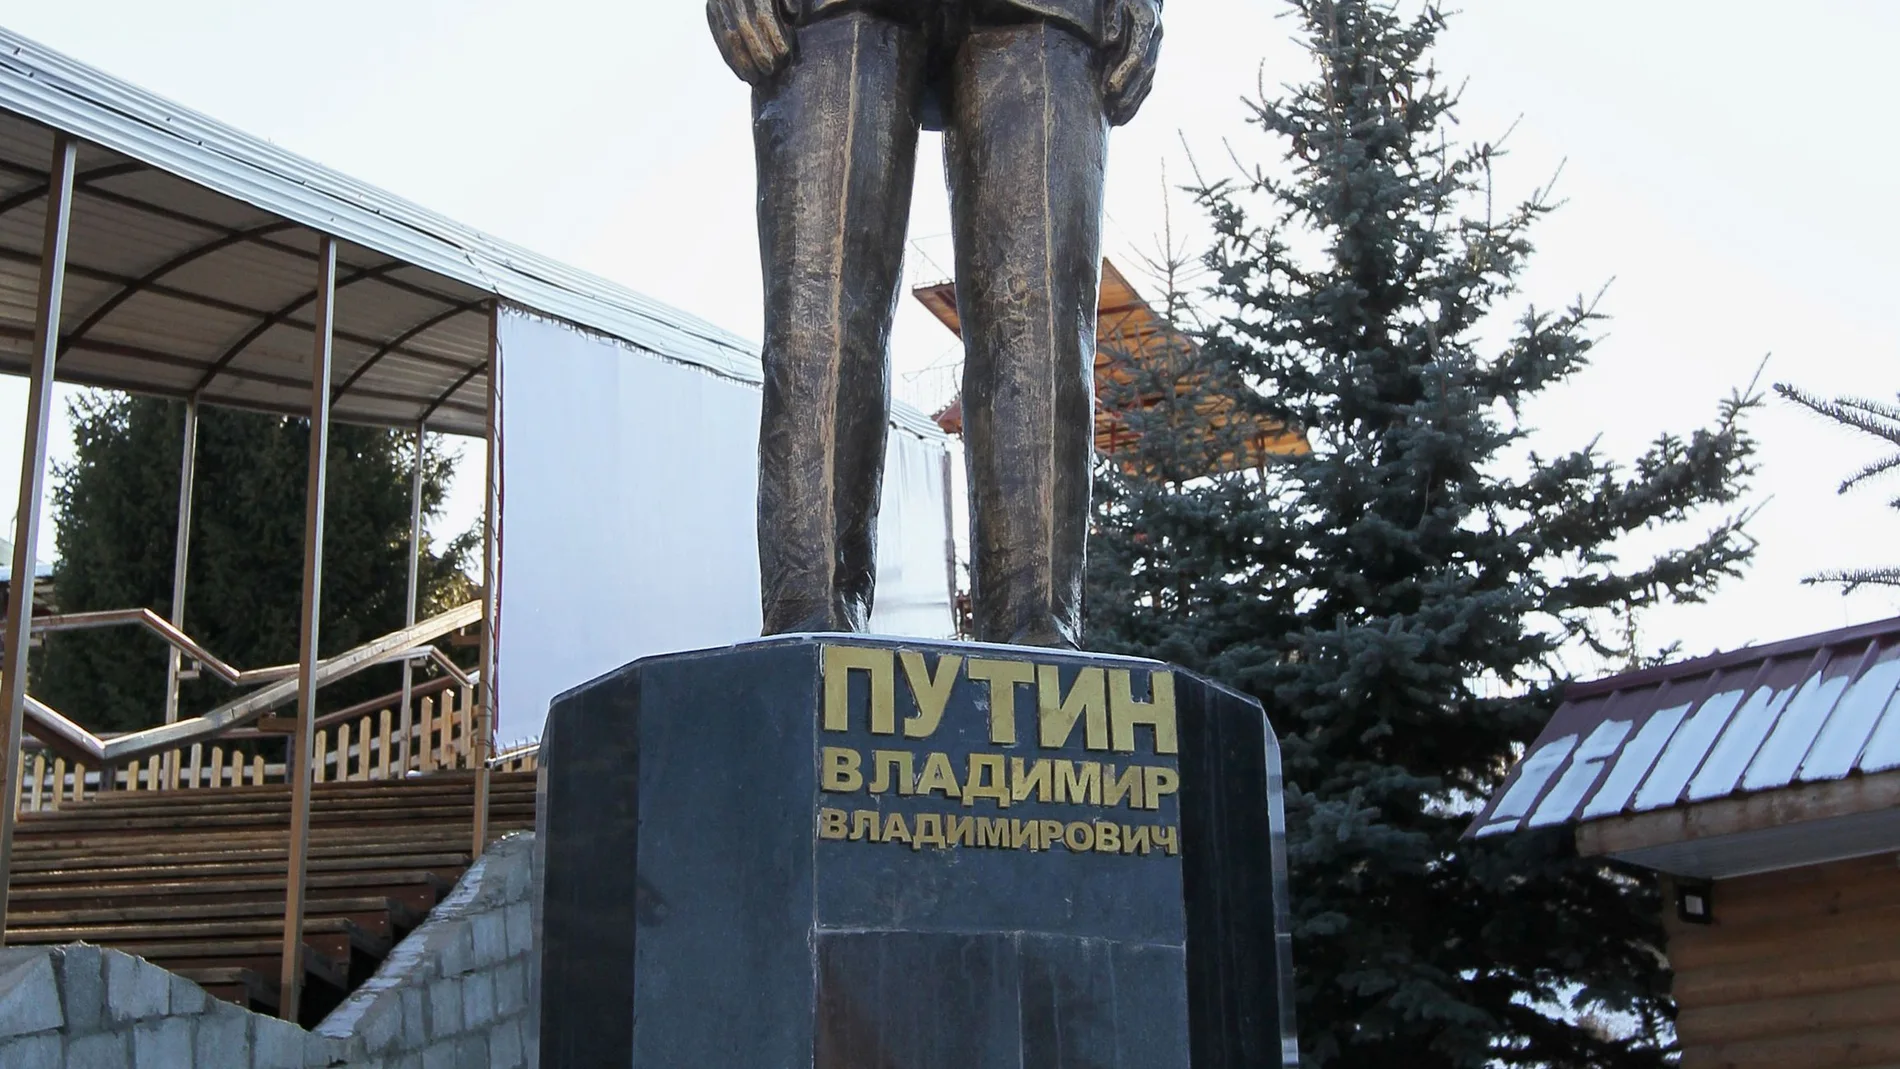 A monument dedicated to Russian President Vladimir�Putin is seen at the Zil ski base in Kyrgyzstan